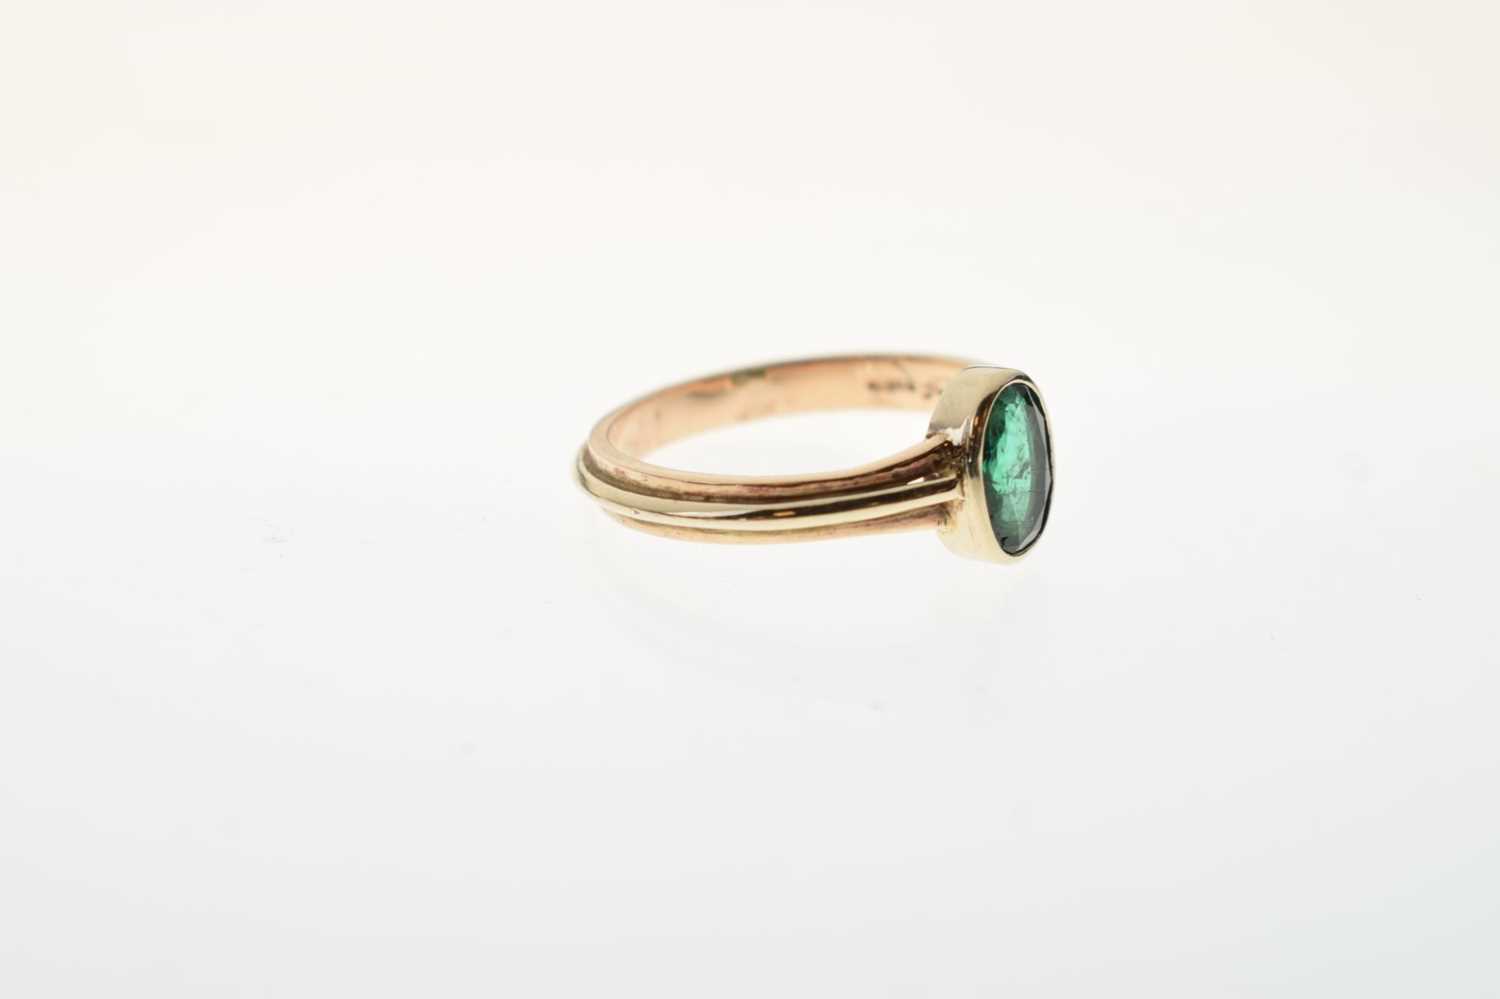 9ct gold ring set a faceted oval green gemstone - Image 2 of 6